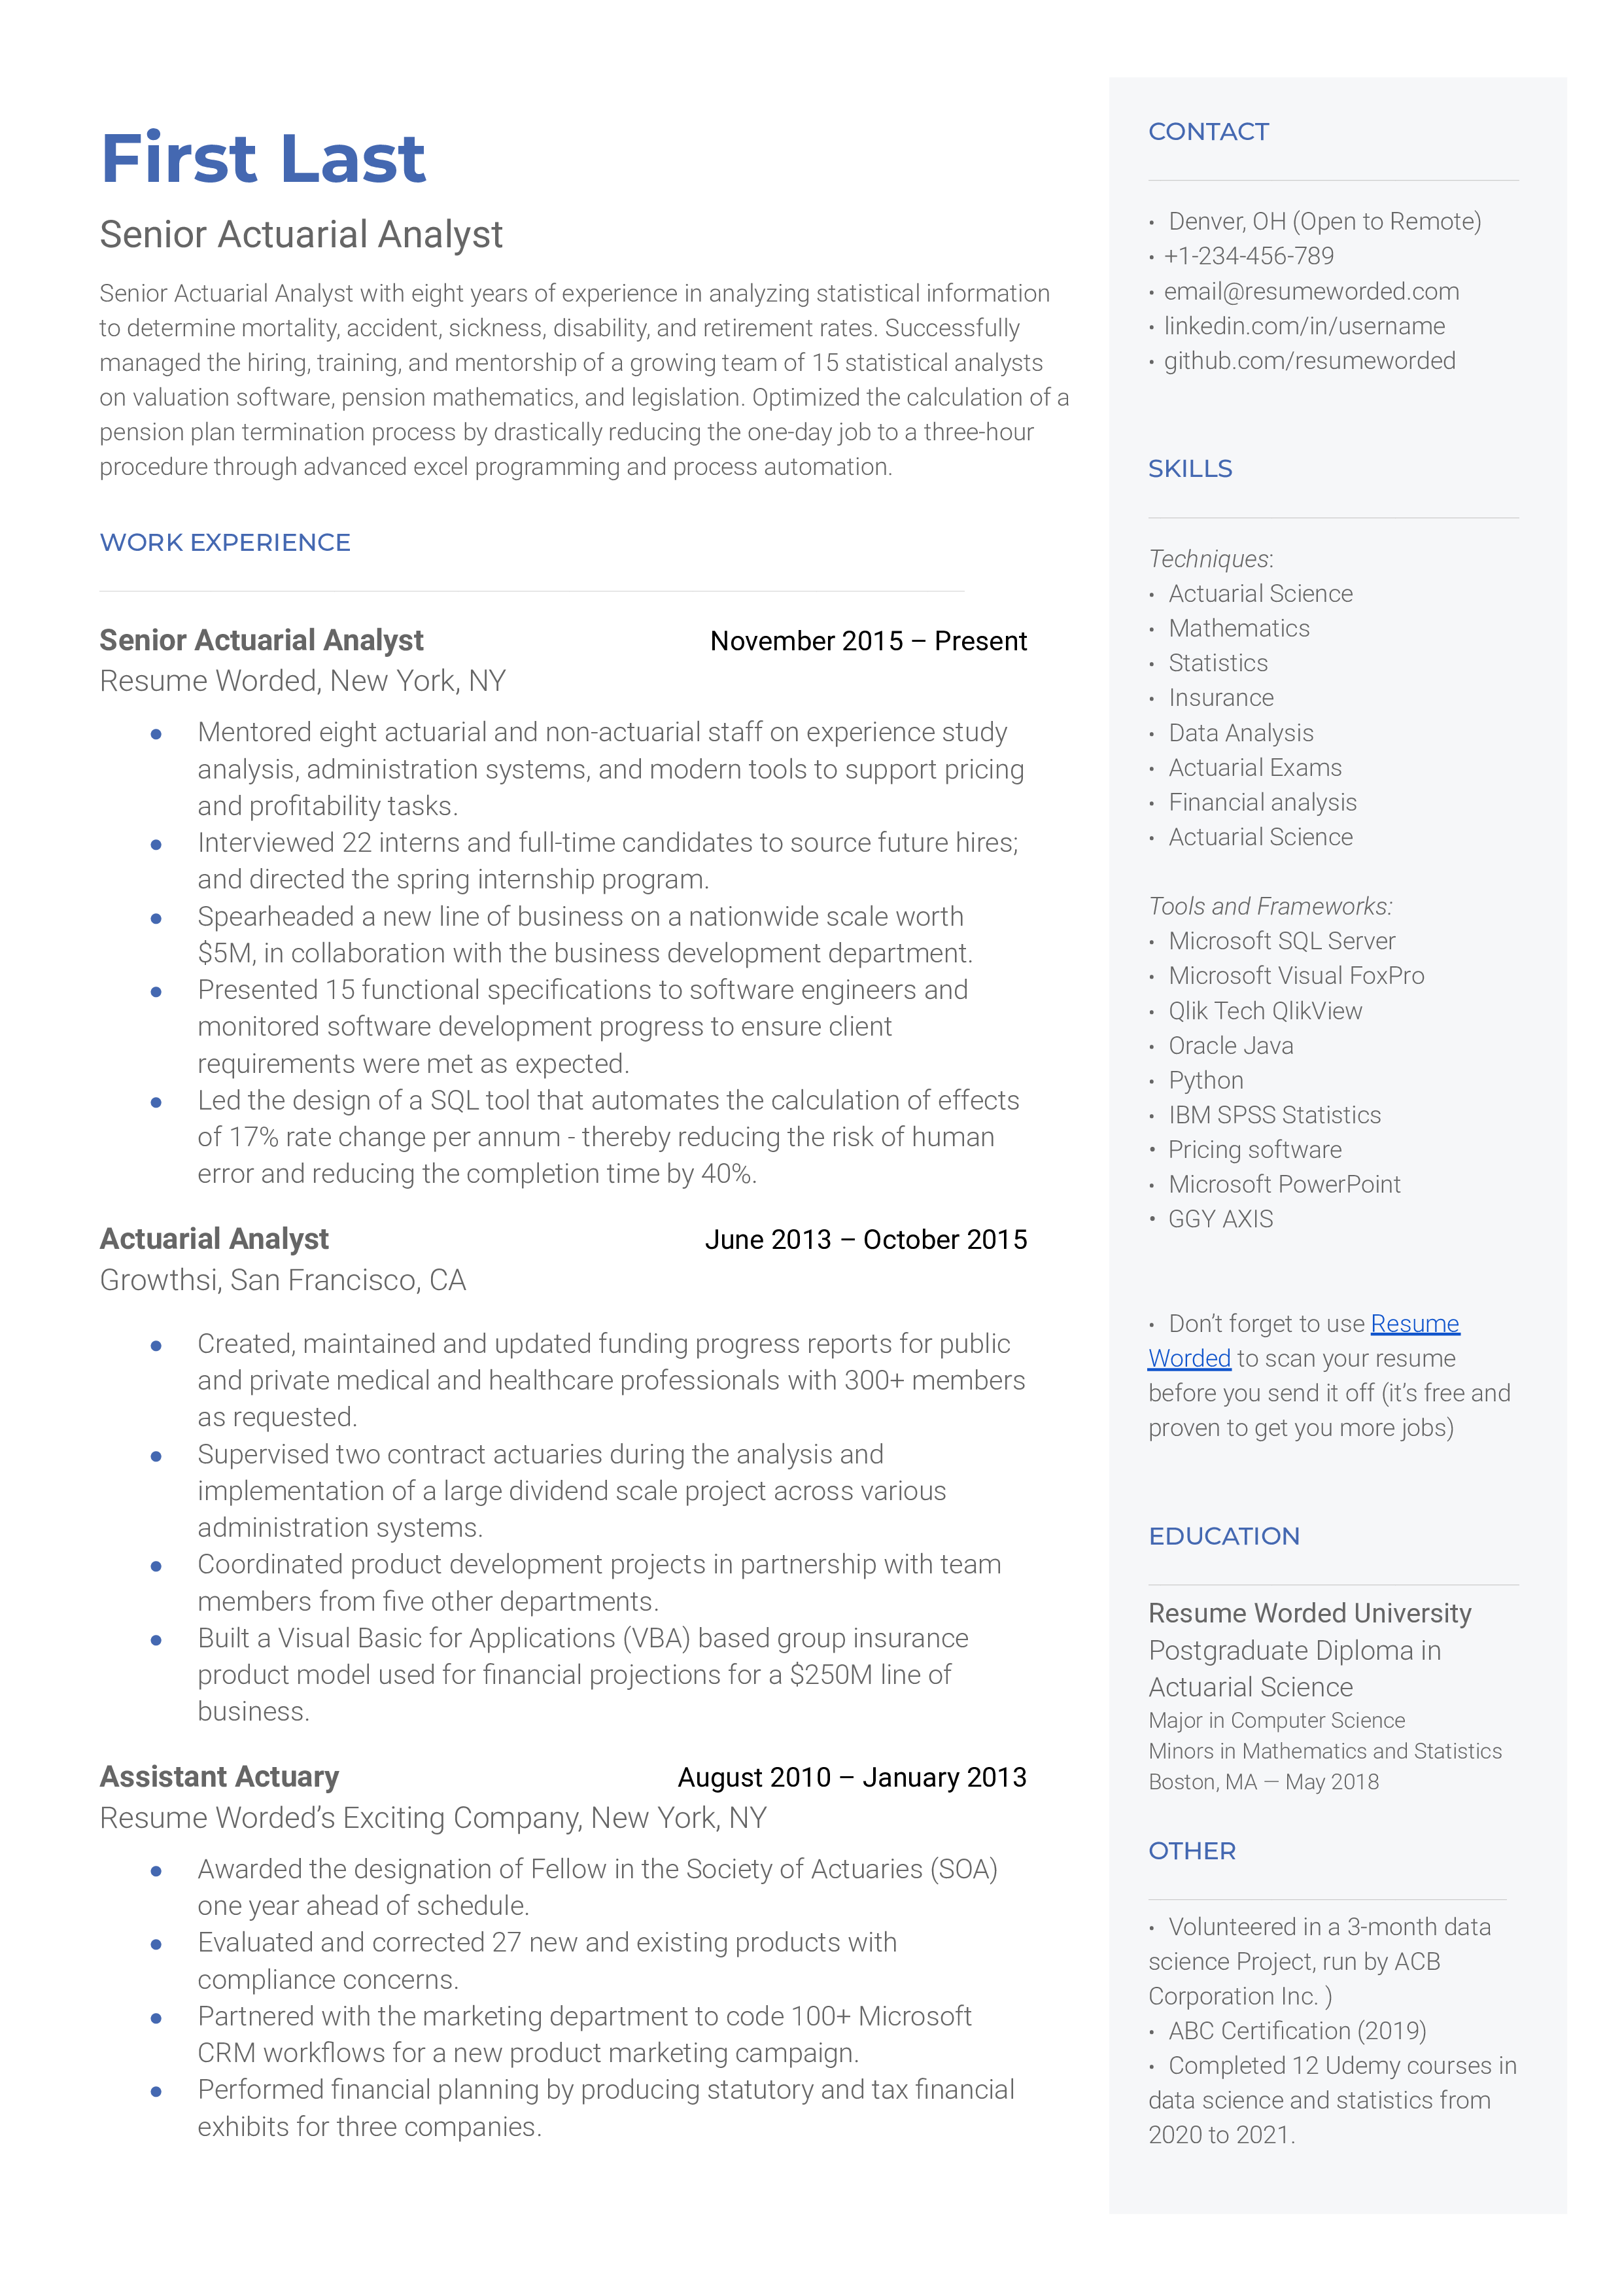 A senior actuarial analyst sample resume that highlights relevant qualifications, skills, tools and techniques